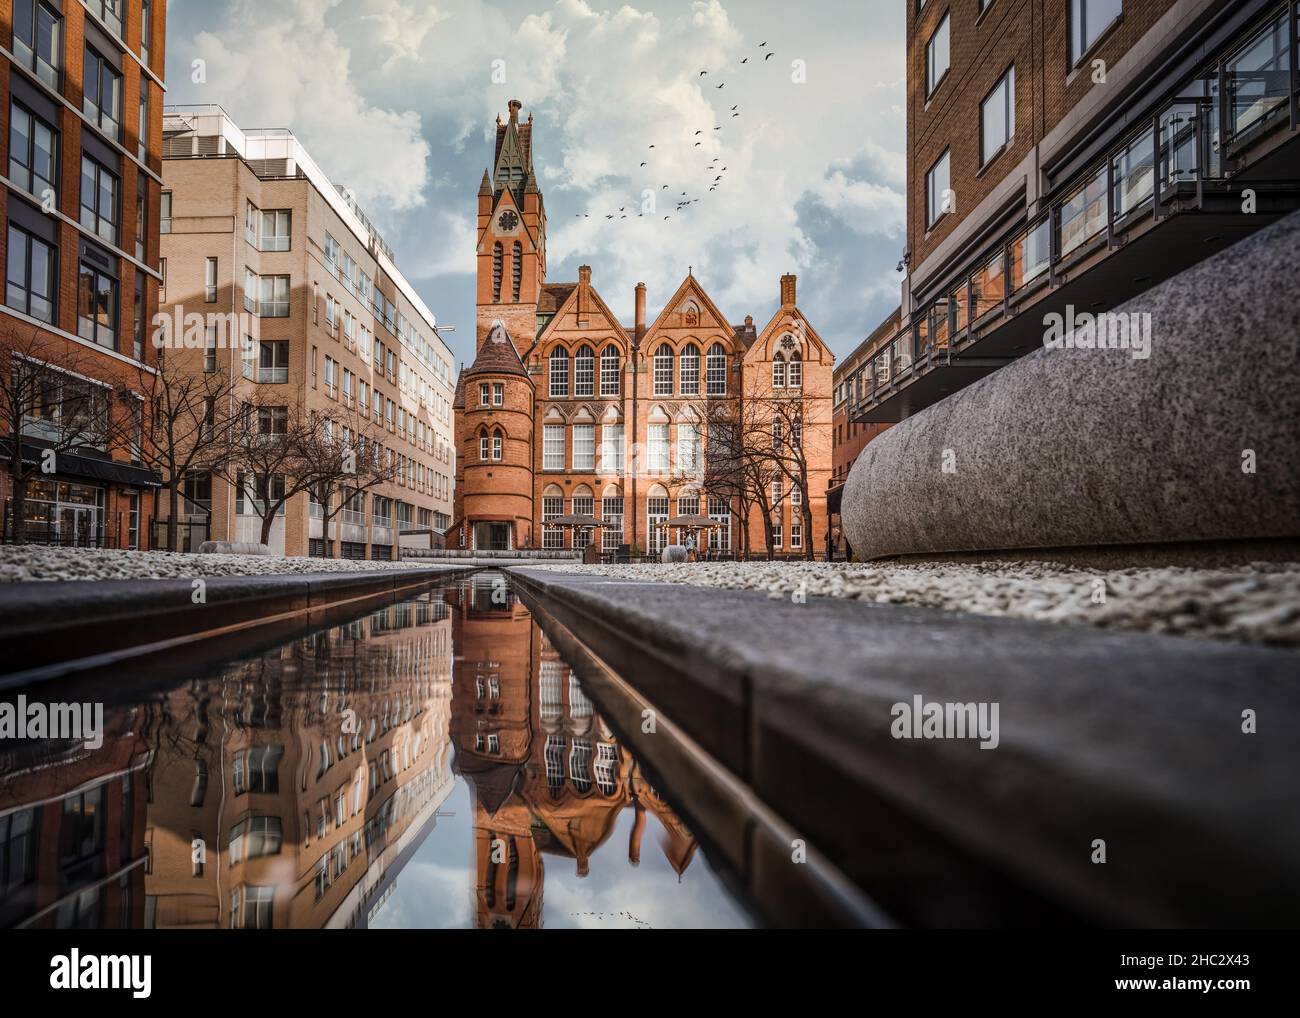 Brindley Place red brick church building reflected in water. West Midlands landmark buildings redevelopment in historic city centre reflection street Stock Photo